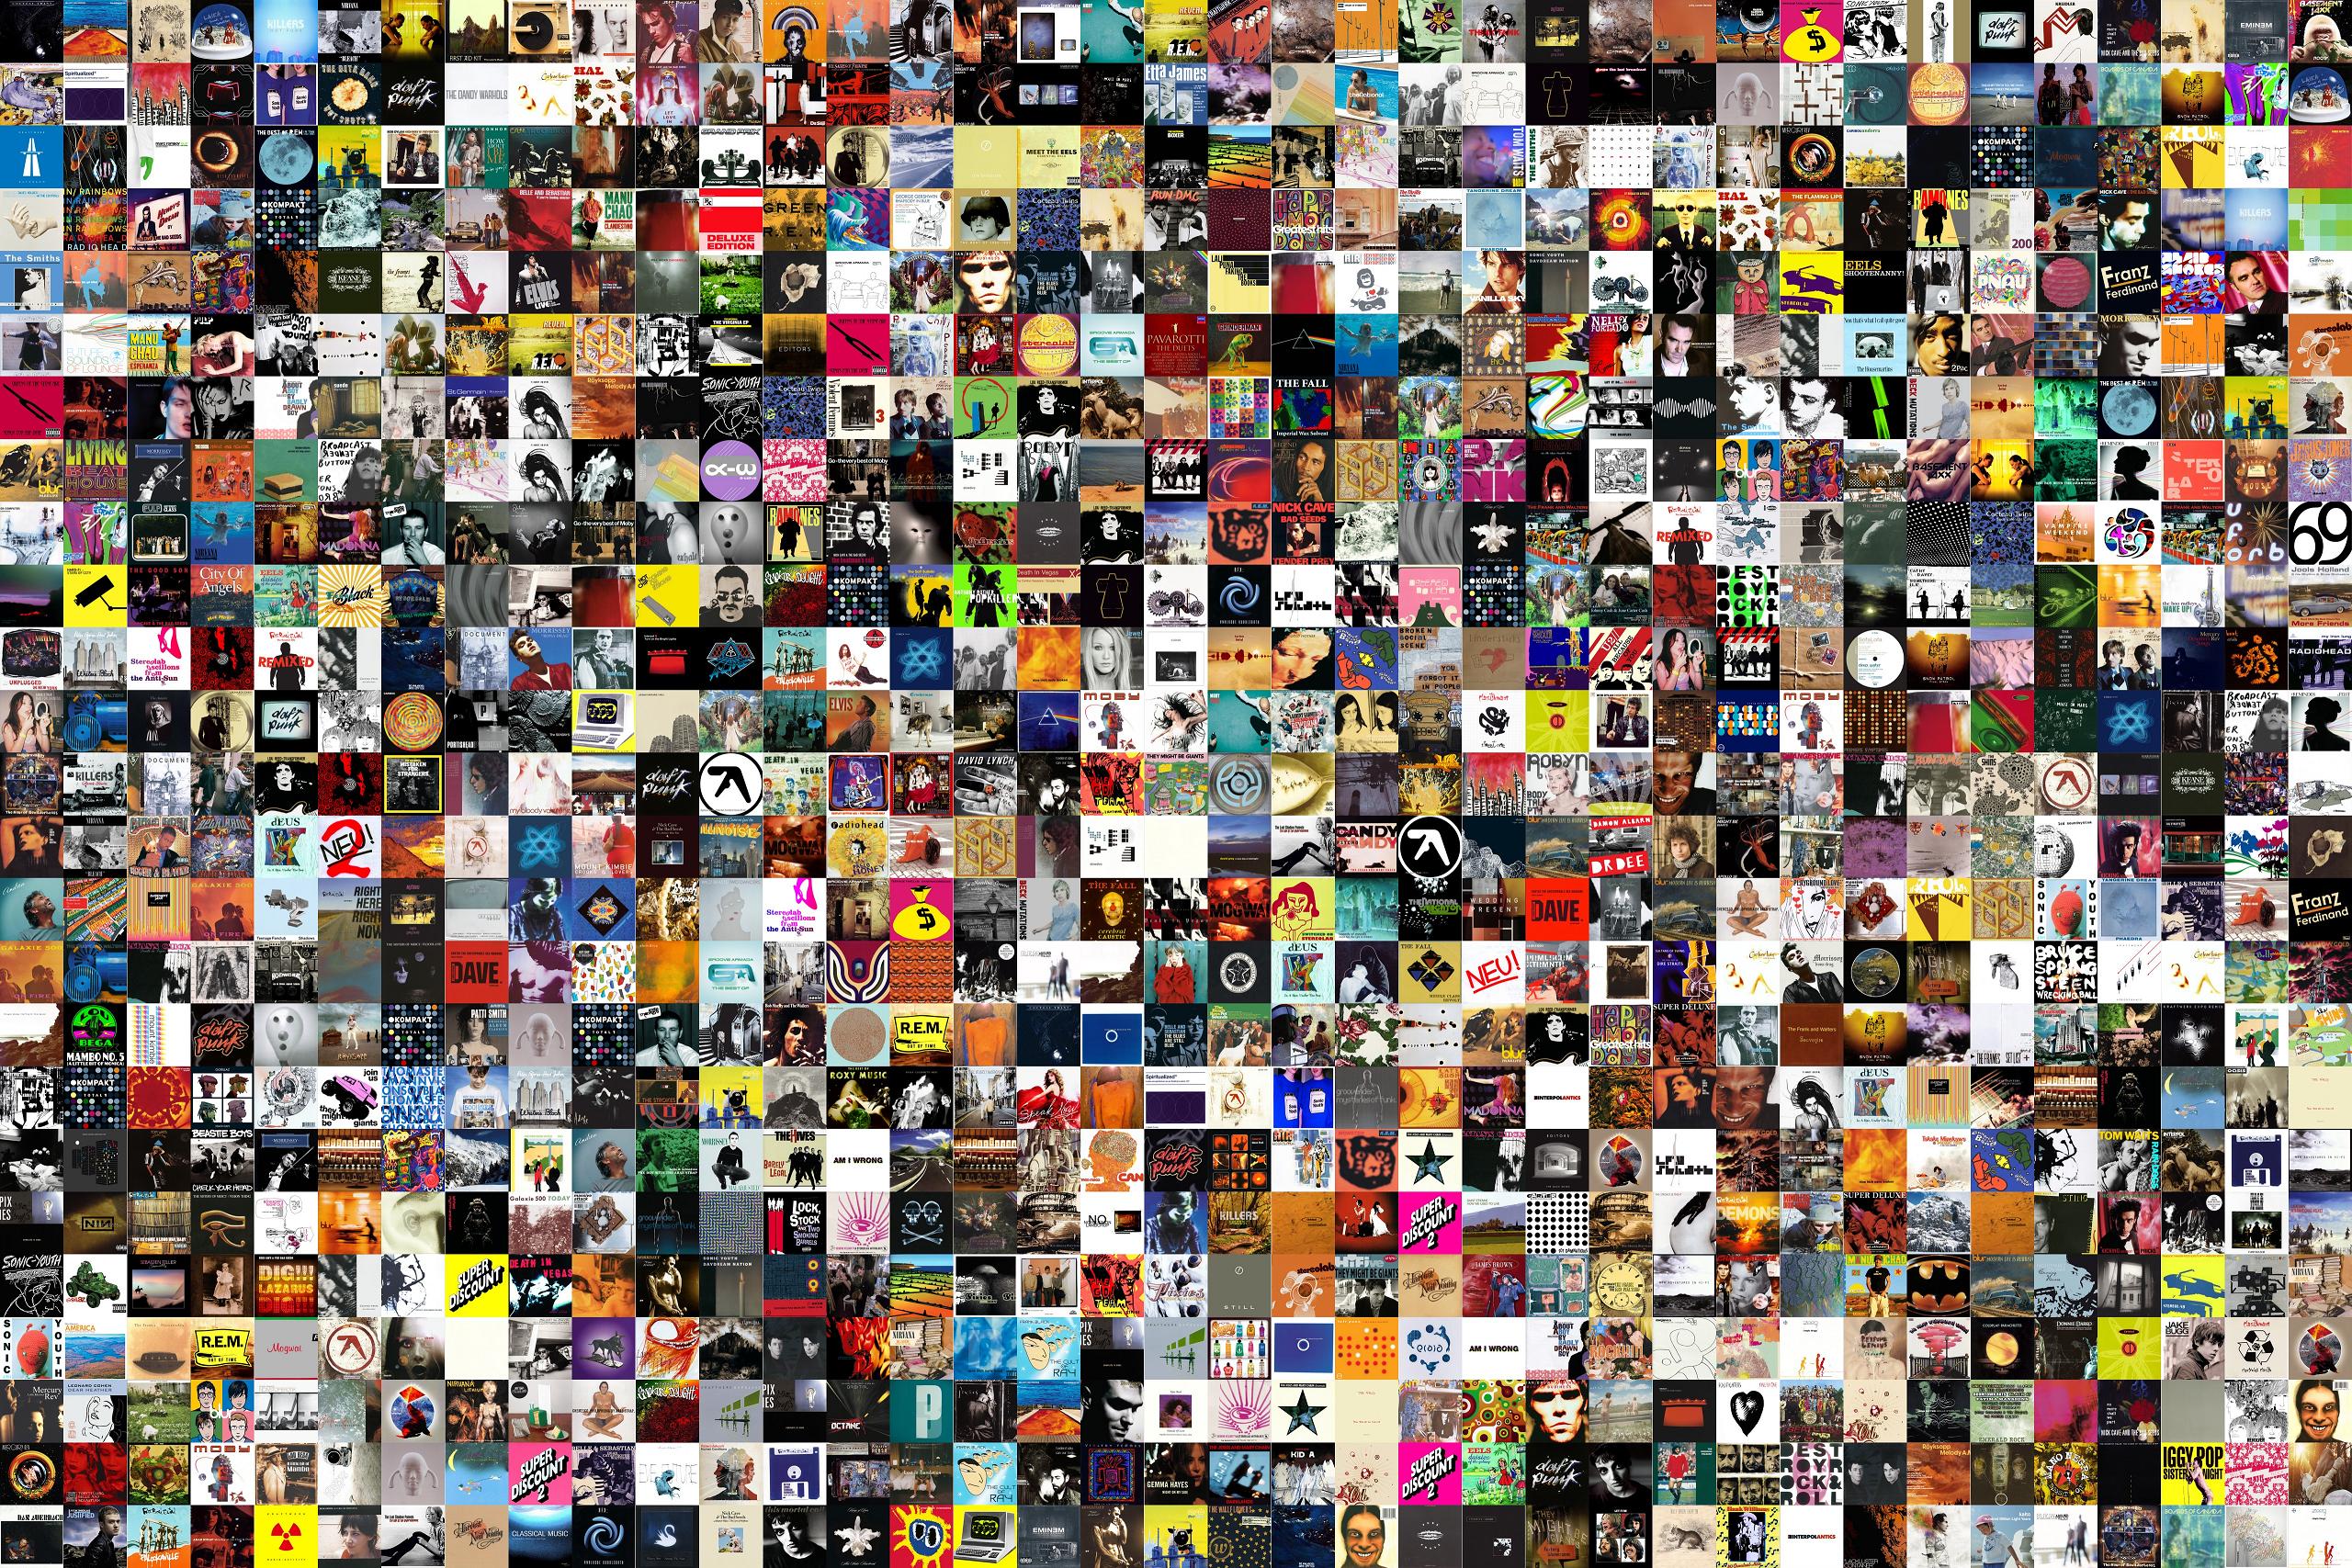 Album Cover Collage from ITunes library